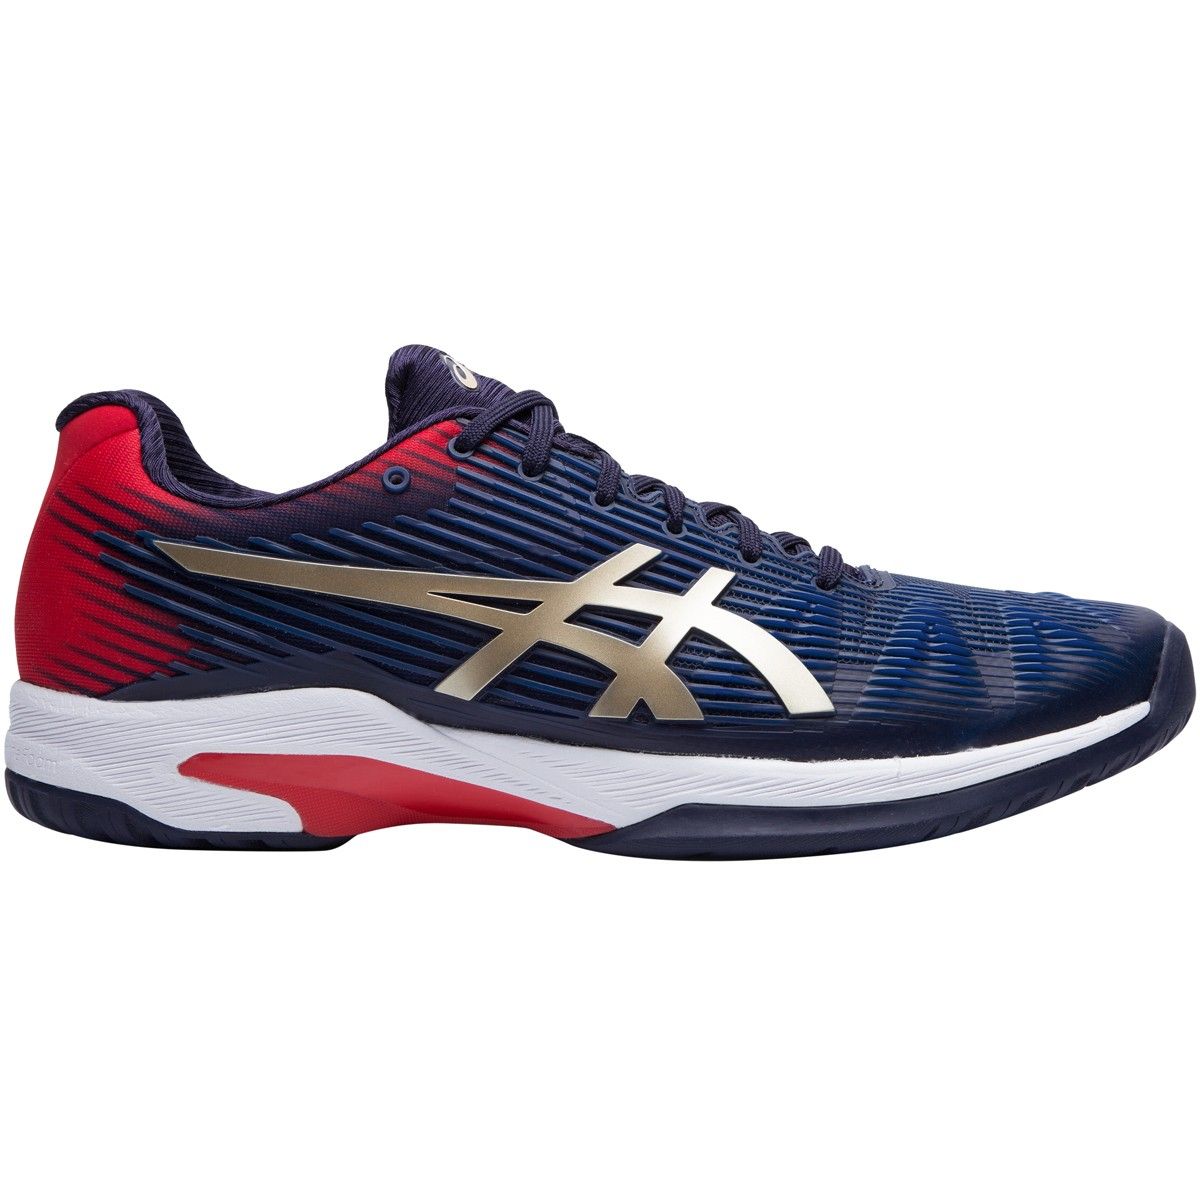 Asics Solution Speed FF Clay Men's Tennis Shoes 1041A004-403